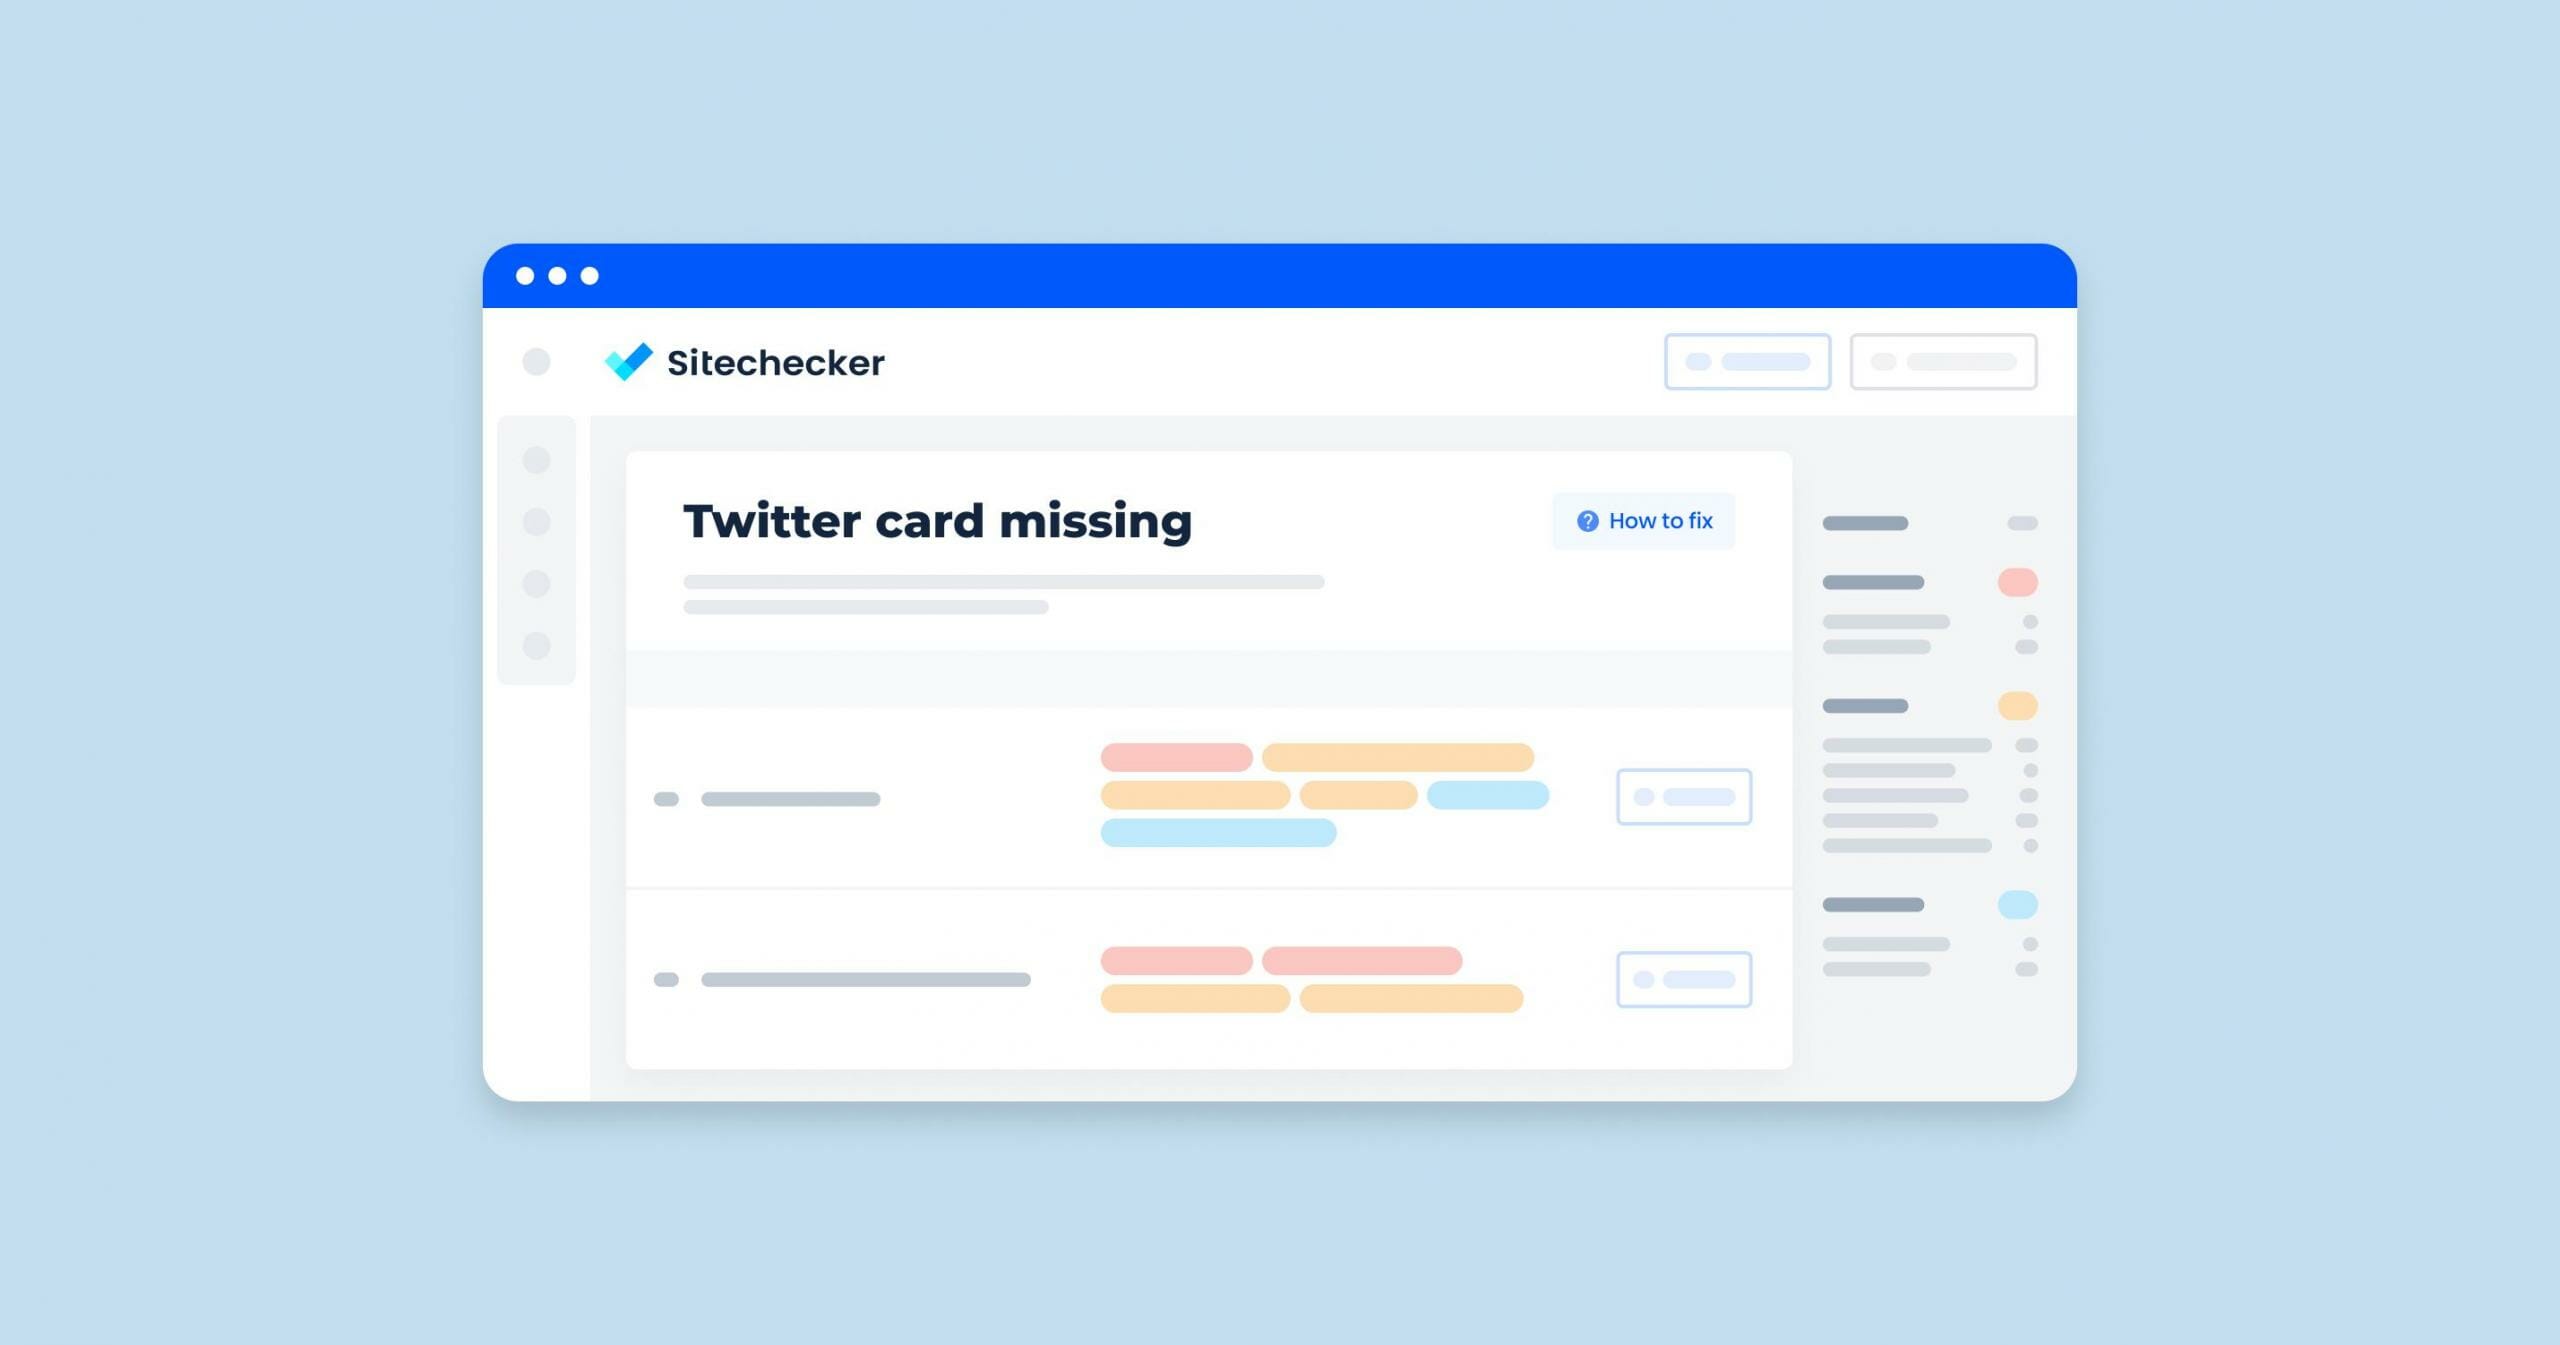 How to fix URLs where Twitter card is missing